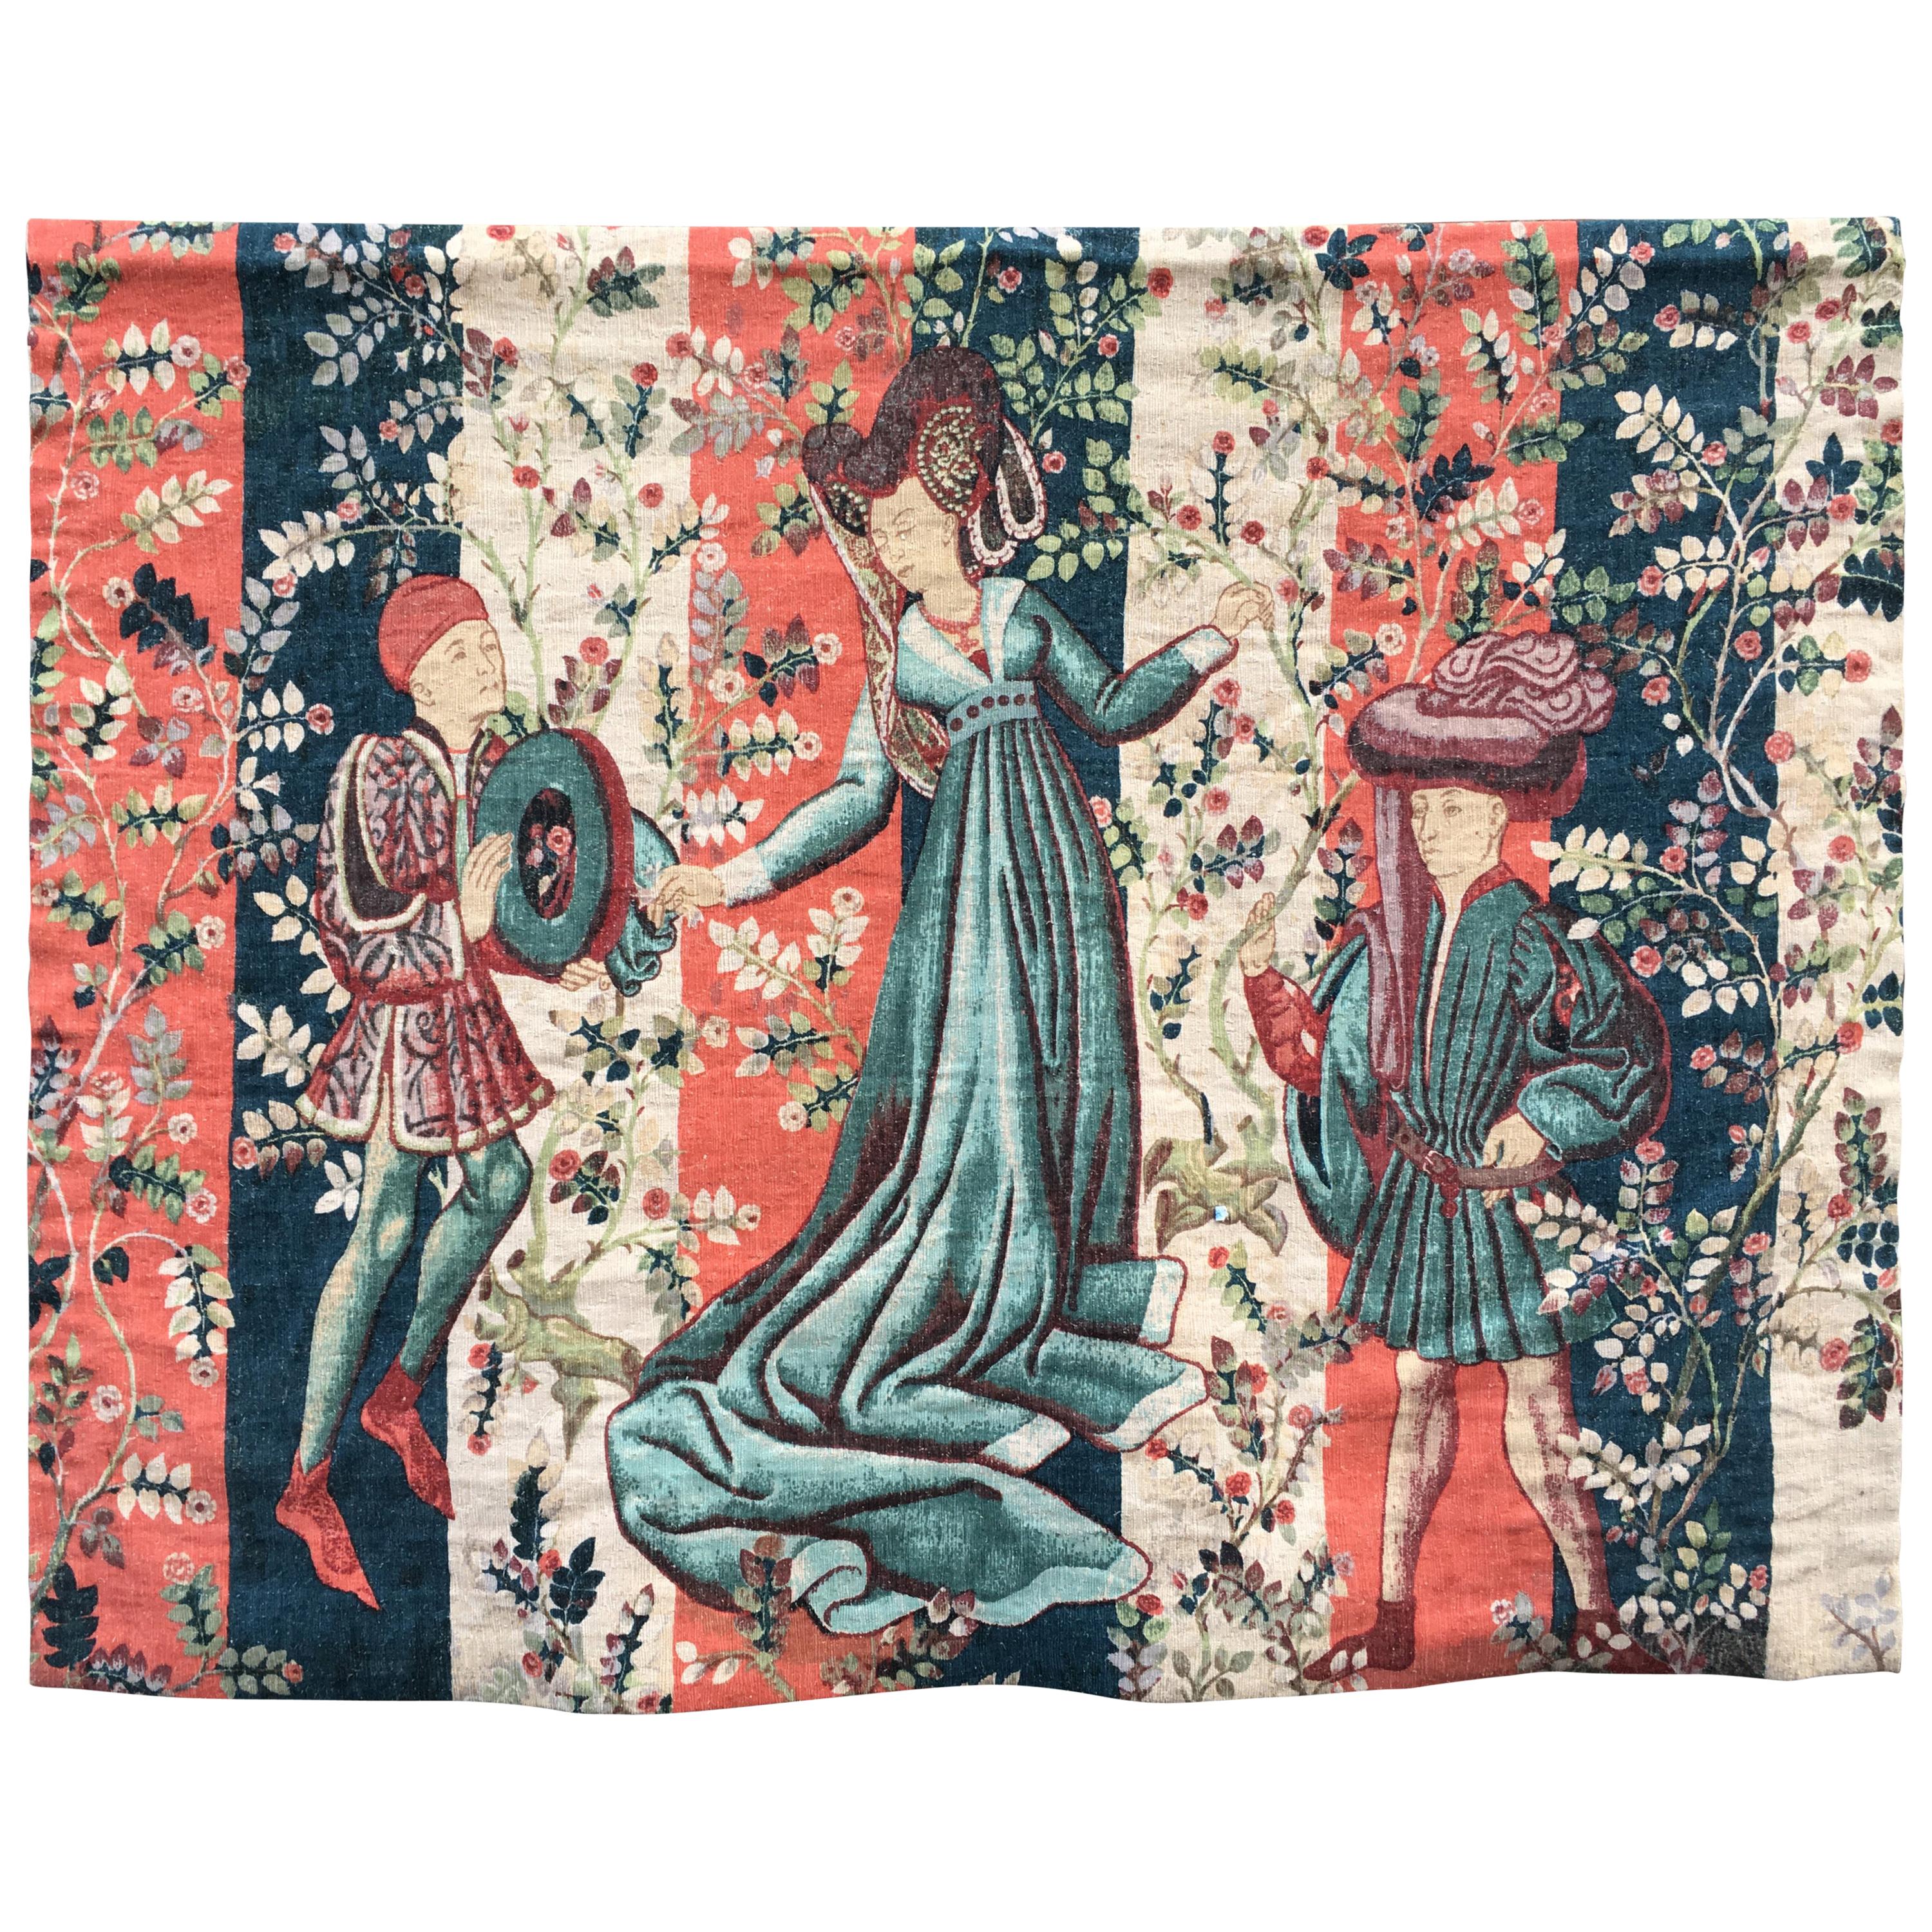 Manufacture Robert Four, Printed Tapestry after a 16th Century Tapestry